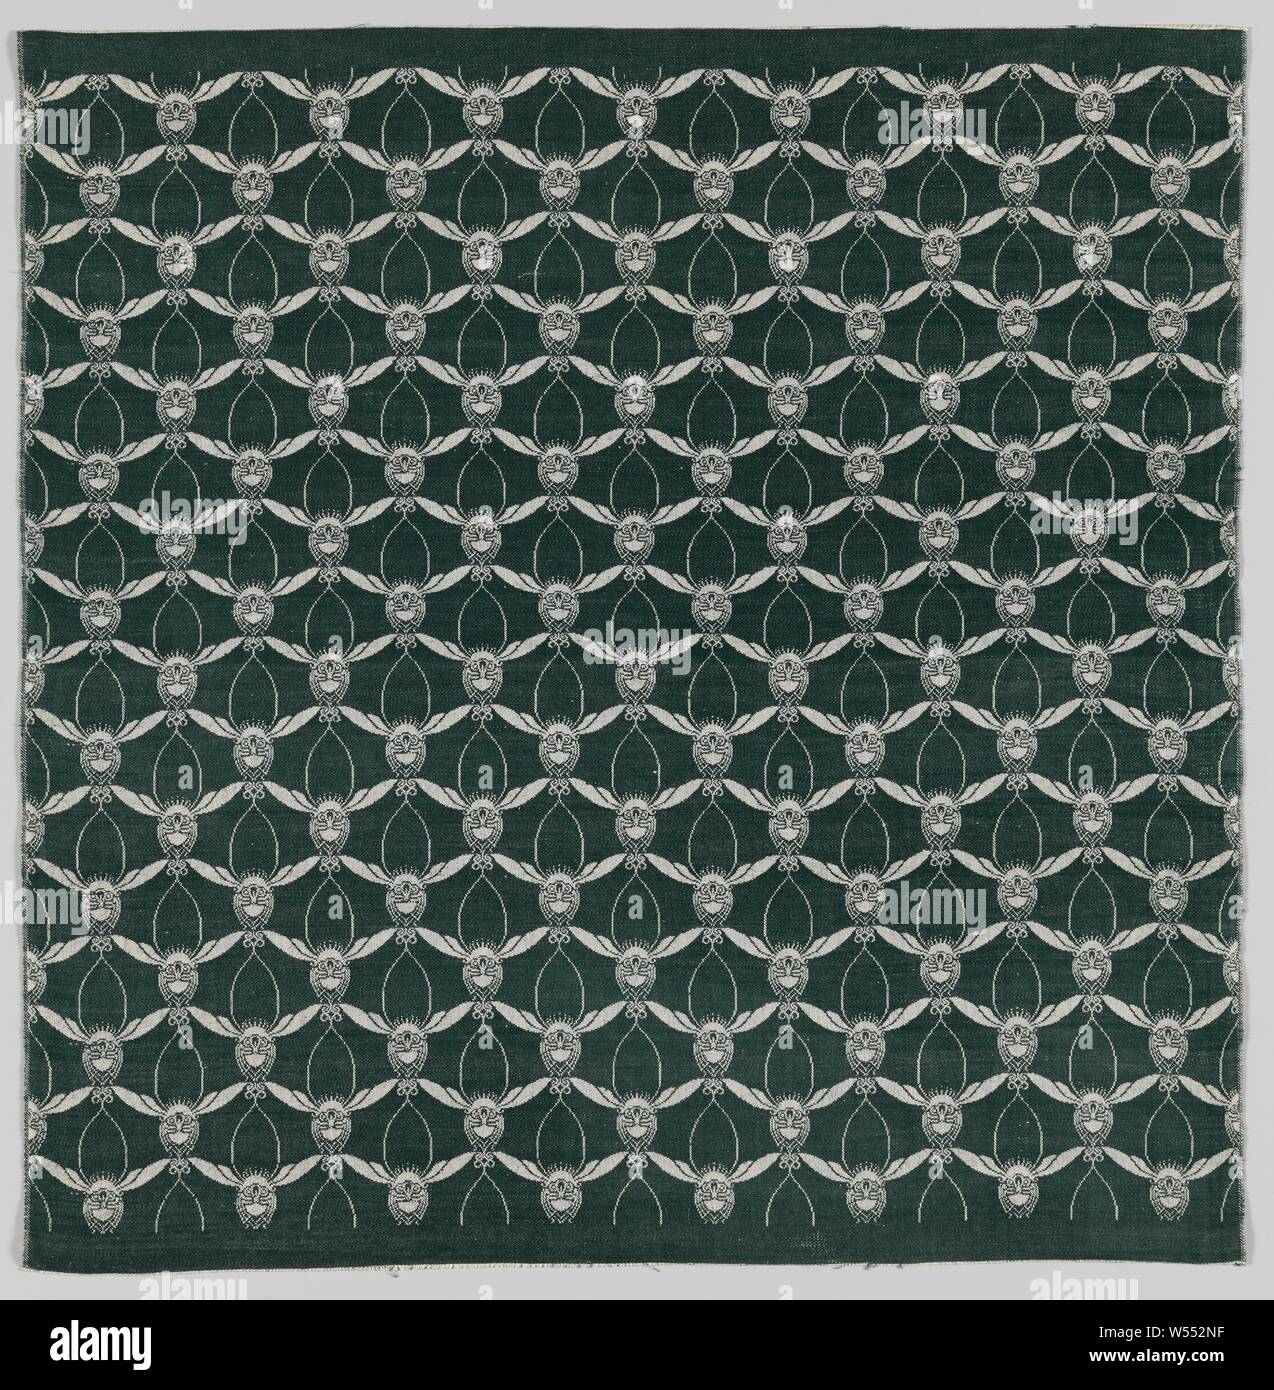 Steel fabric from linen damask with 'Wild Flight' design, Steel fabric from linen damask with a pattern of bees (or birds) in wild flight, in natural on a dark green background., Chris Lebeau, Eindhoven, 1911 - 1915, linen (material), damask, h 59.7 cm × w 58.5 cm Stock Photo